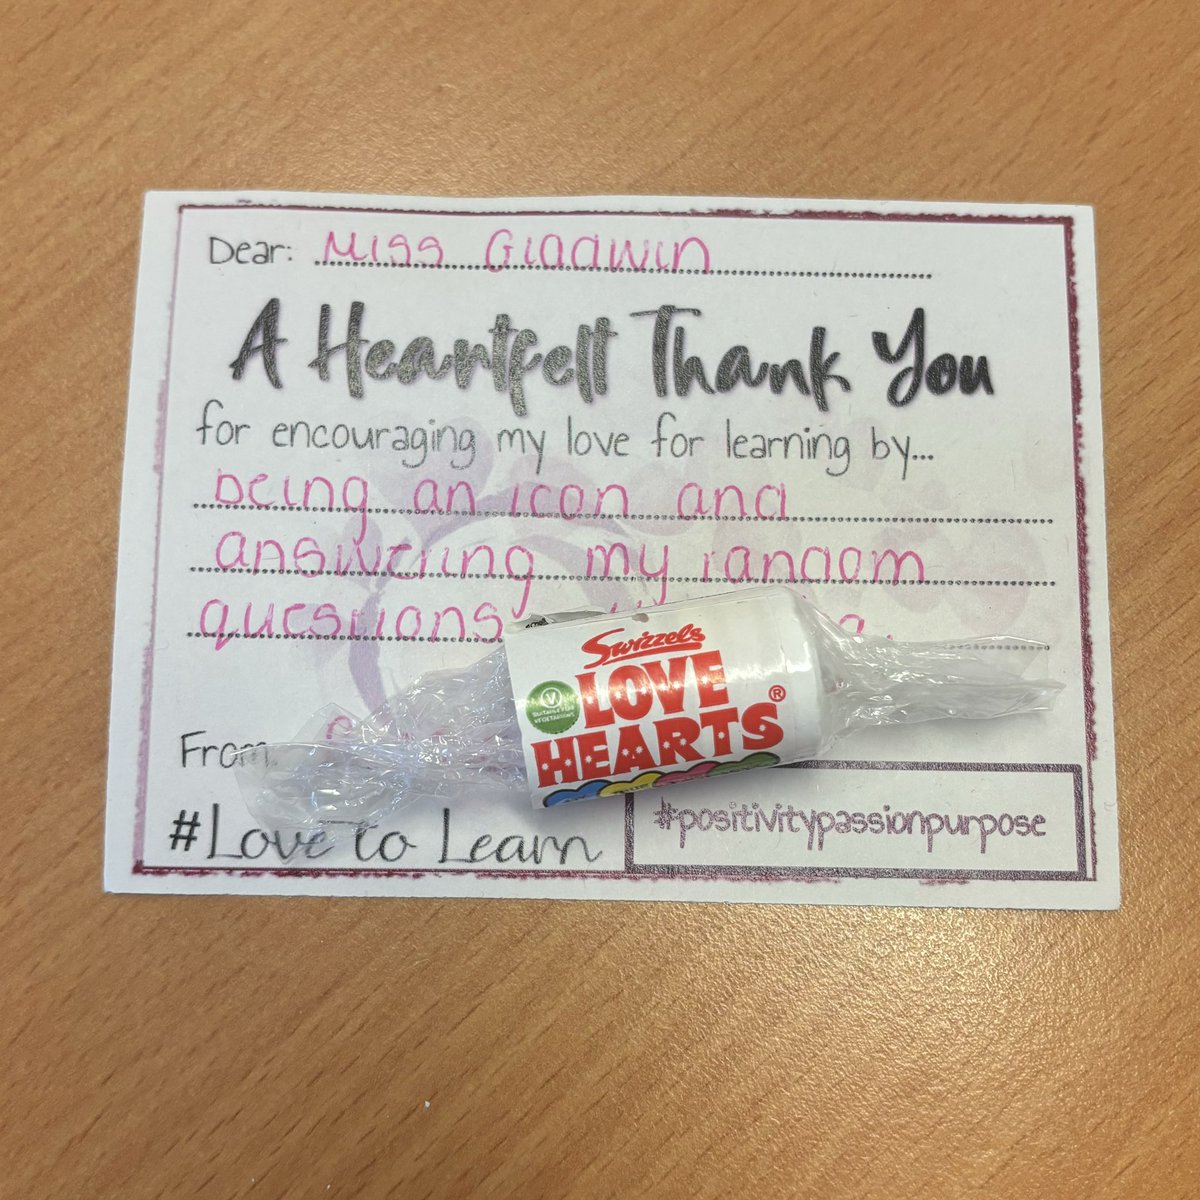 What a lovely end to the week, receiving “A Heartfelt Thank You” from a student 🥰 #lovetolearn